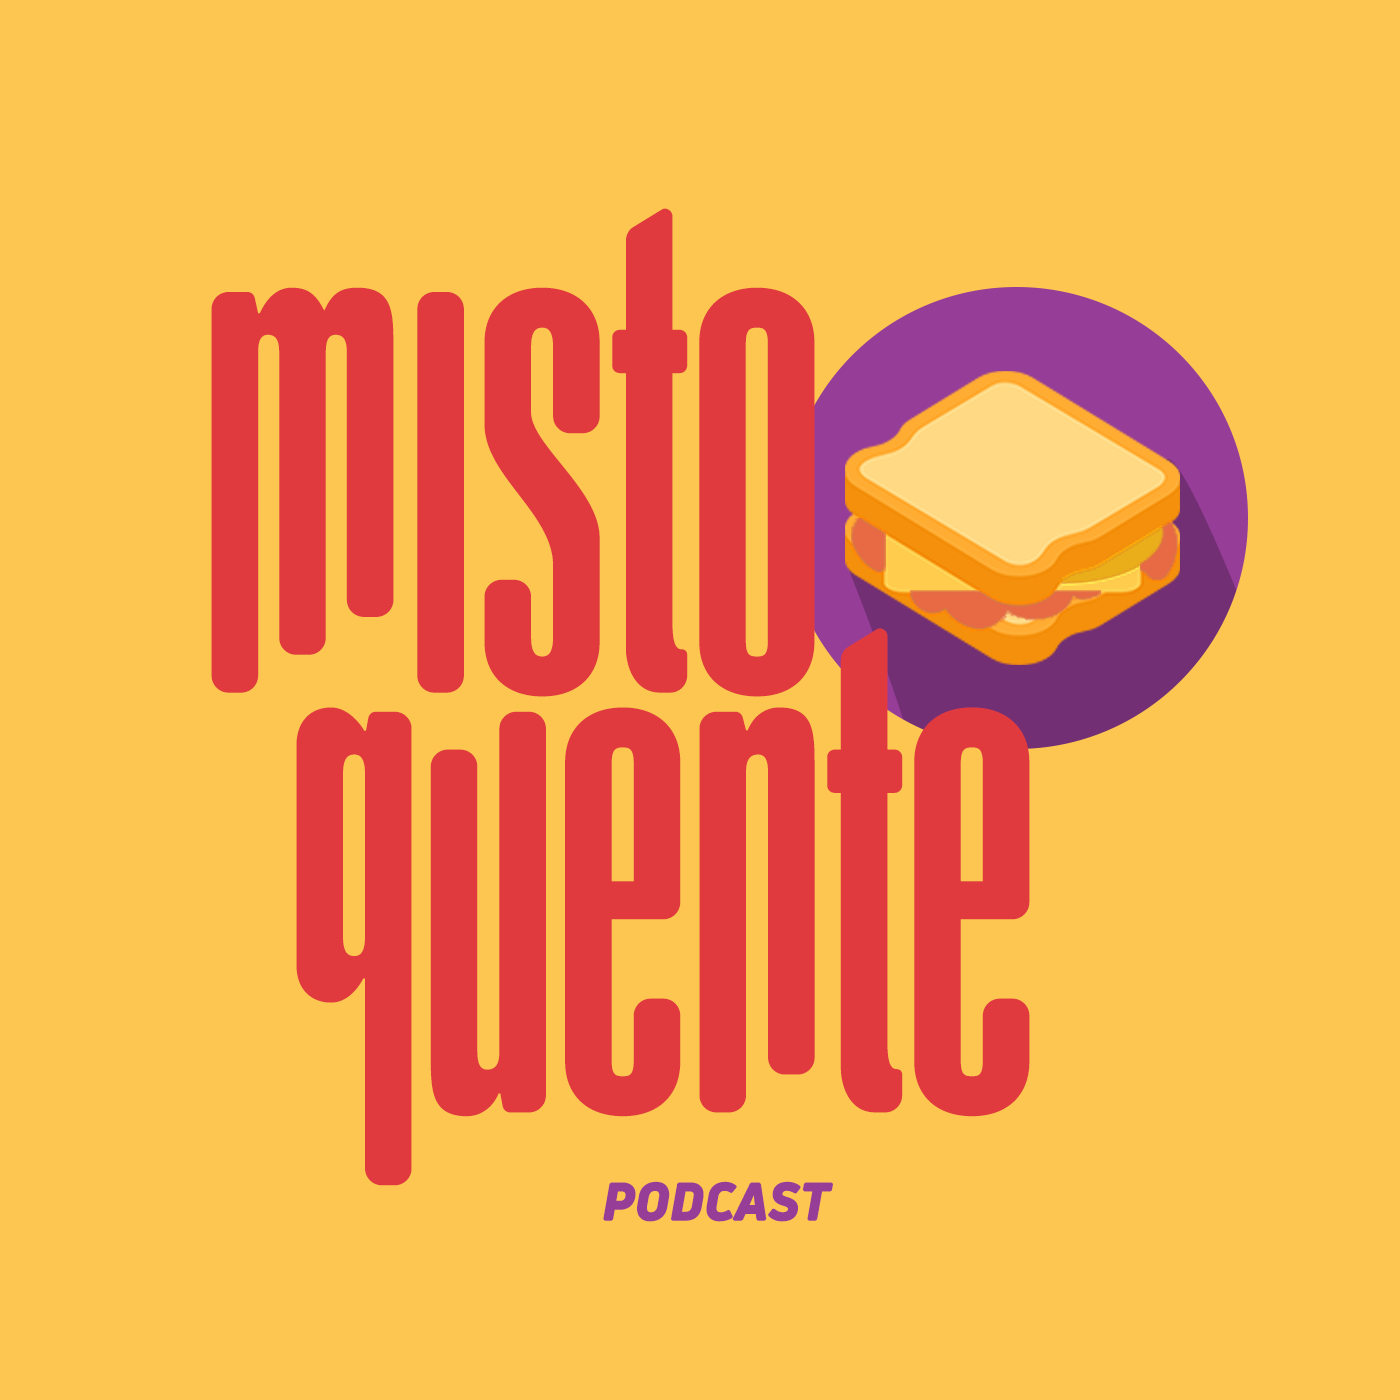 http://www.sec.unicamp.br/wp-content/uploads/2018/08/mistoquentepodcastunicamp14001400.png